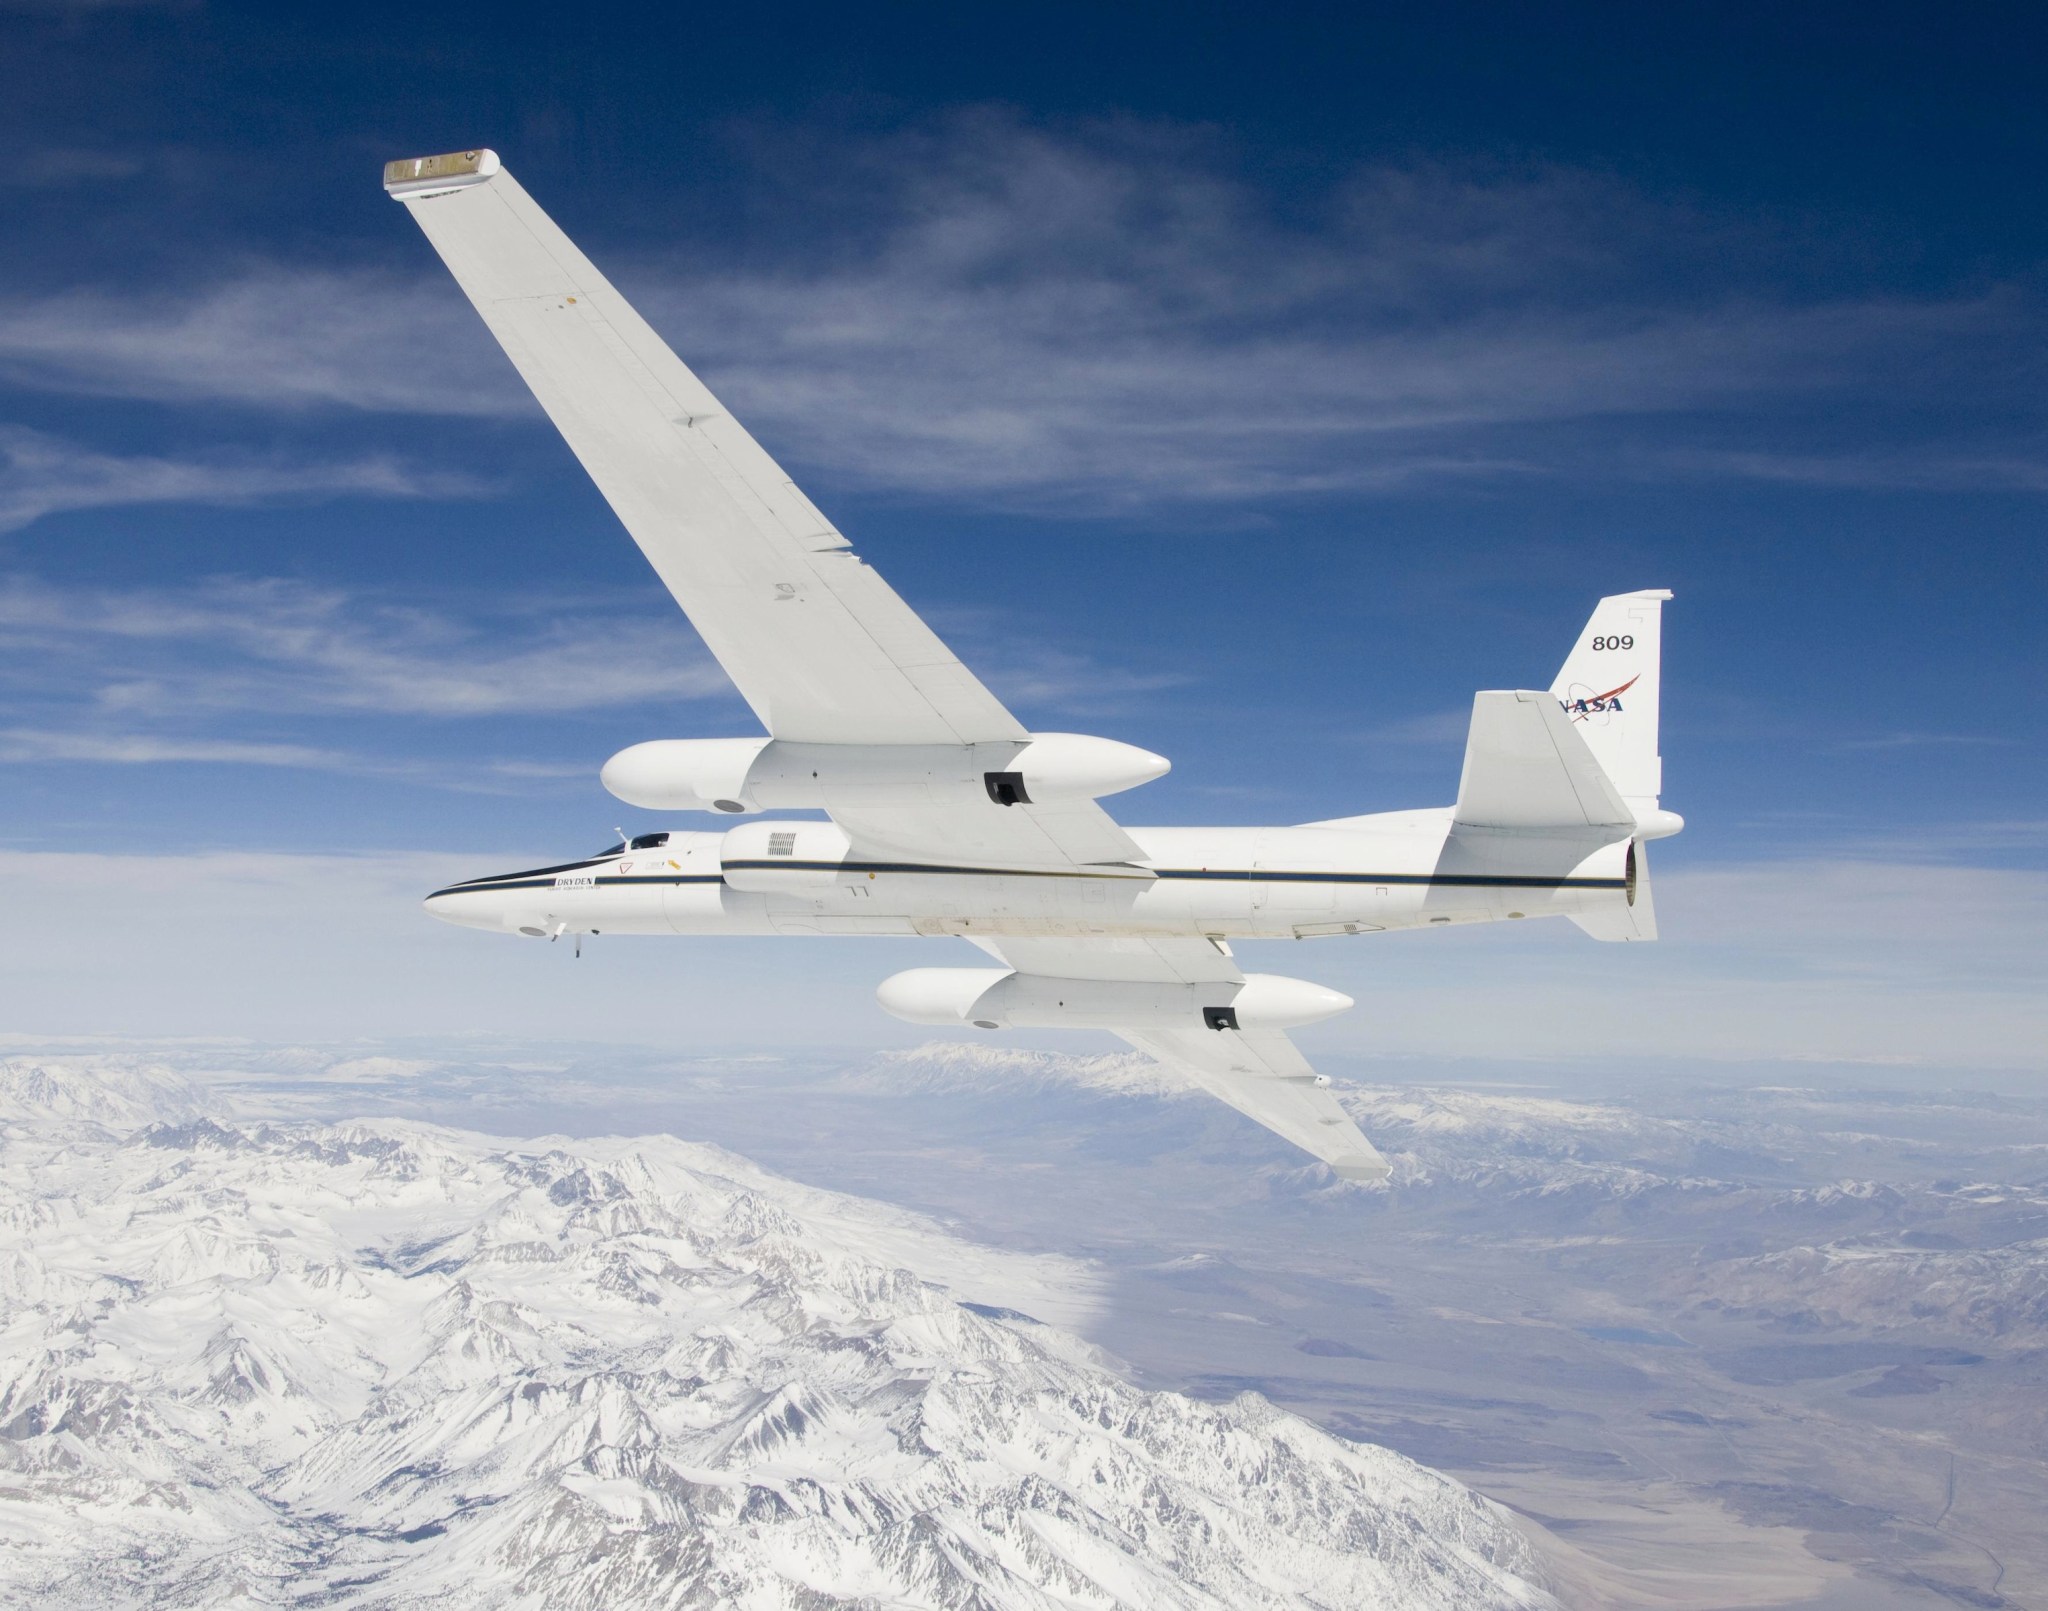 Scientists are using NASA's ER-2 high altitude research aircraft to study the atmospheric effects of powerful summer thunderstorms that erupt over the U.S.